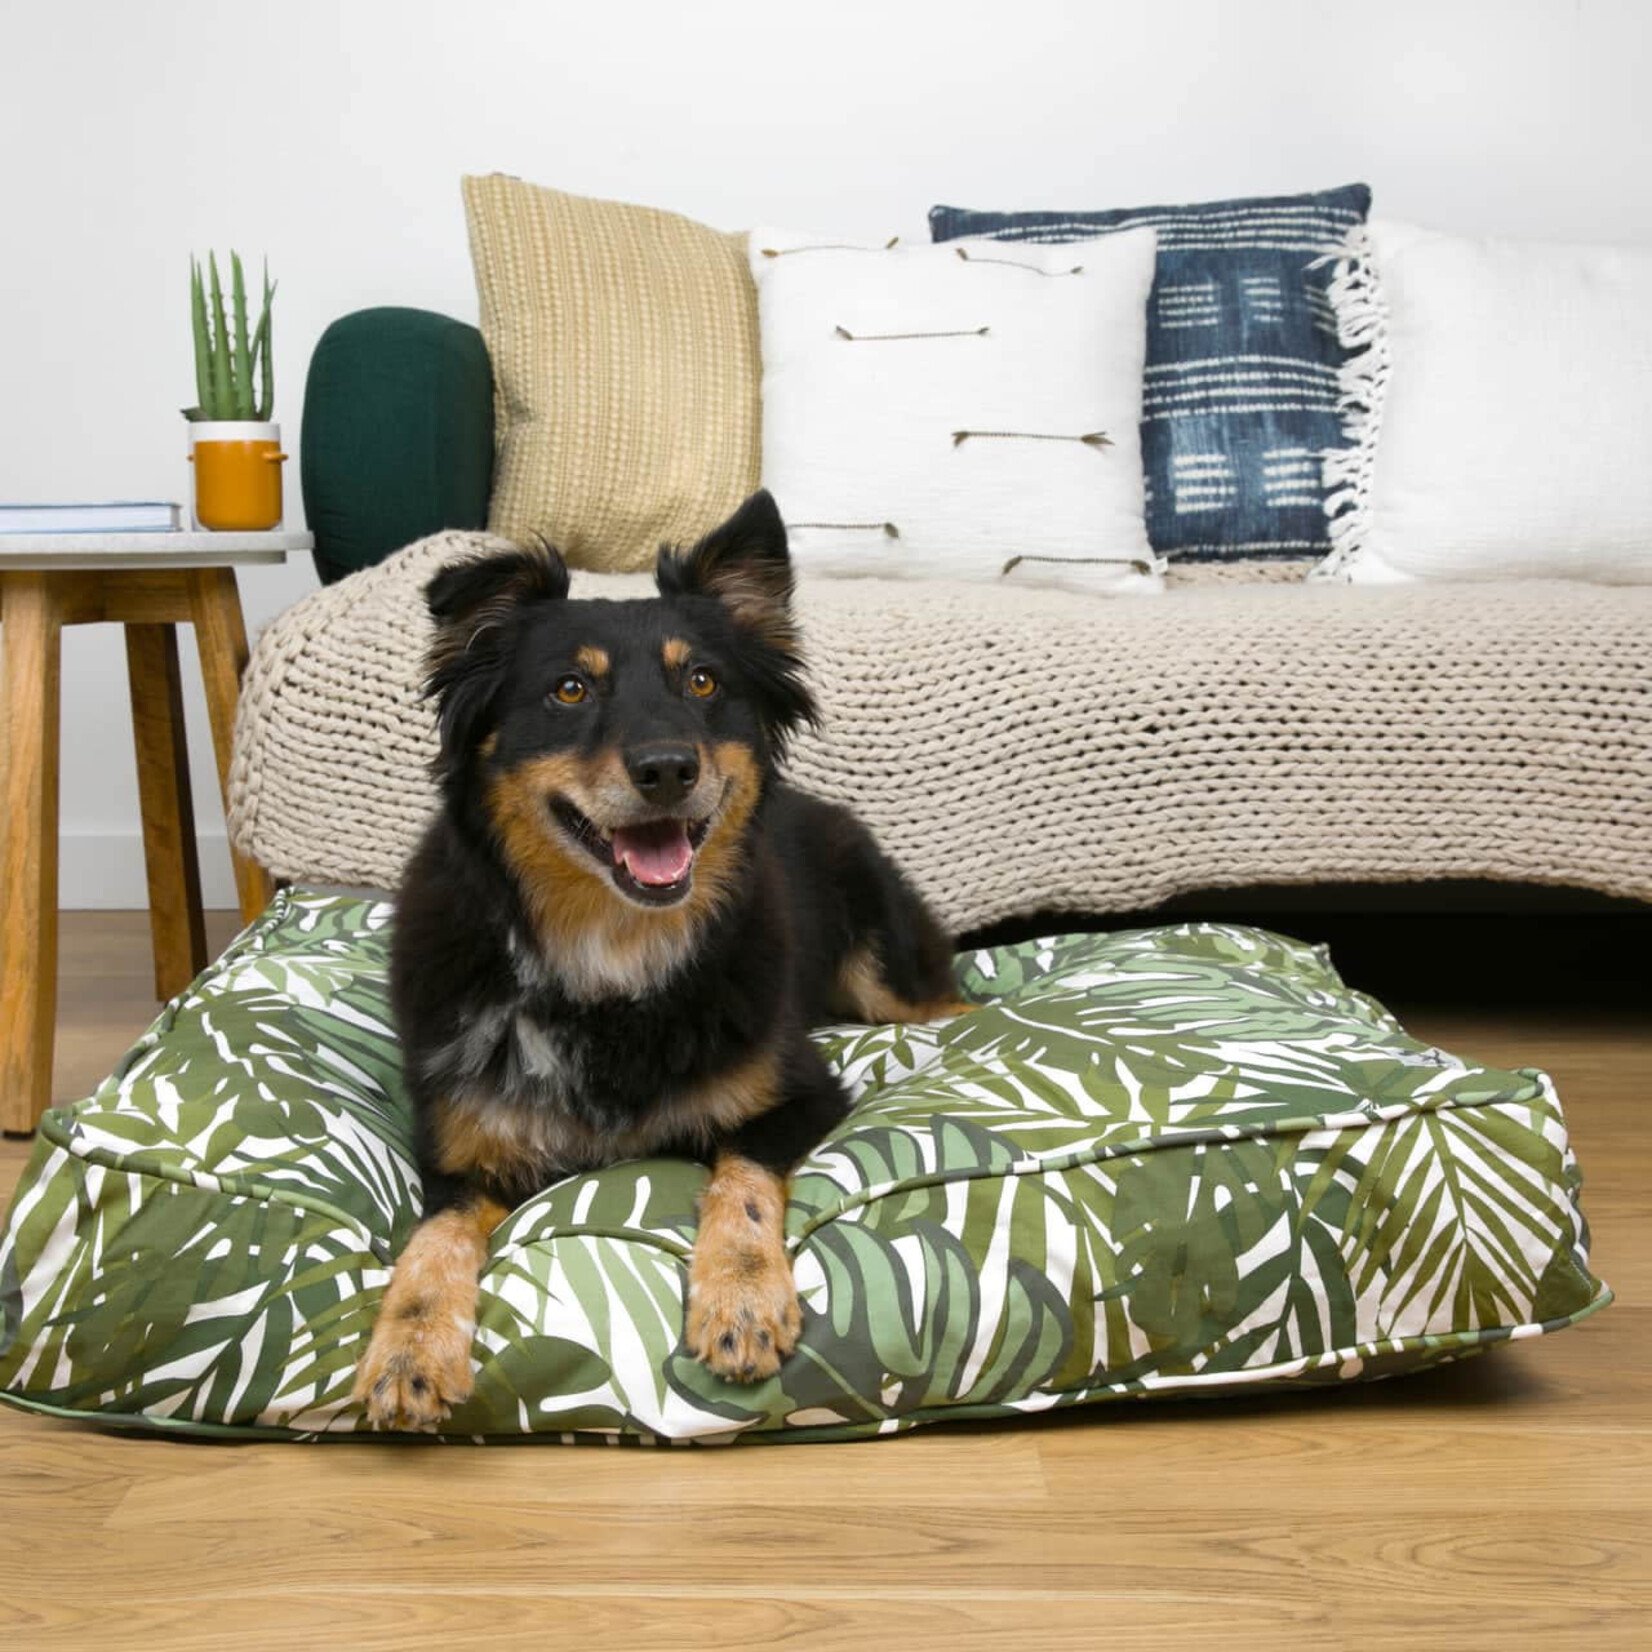 Molly Mutt - Dog Bed Cover - Carefree